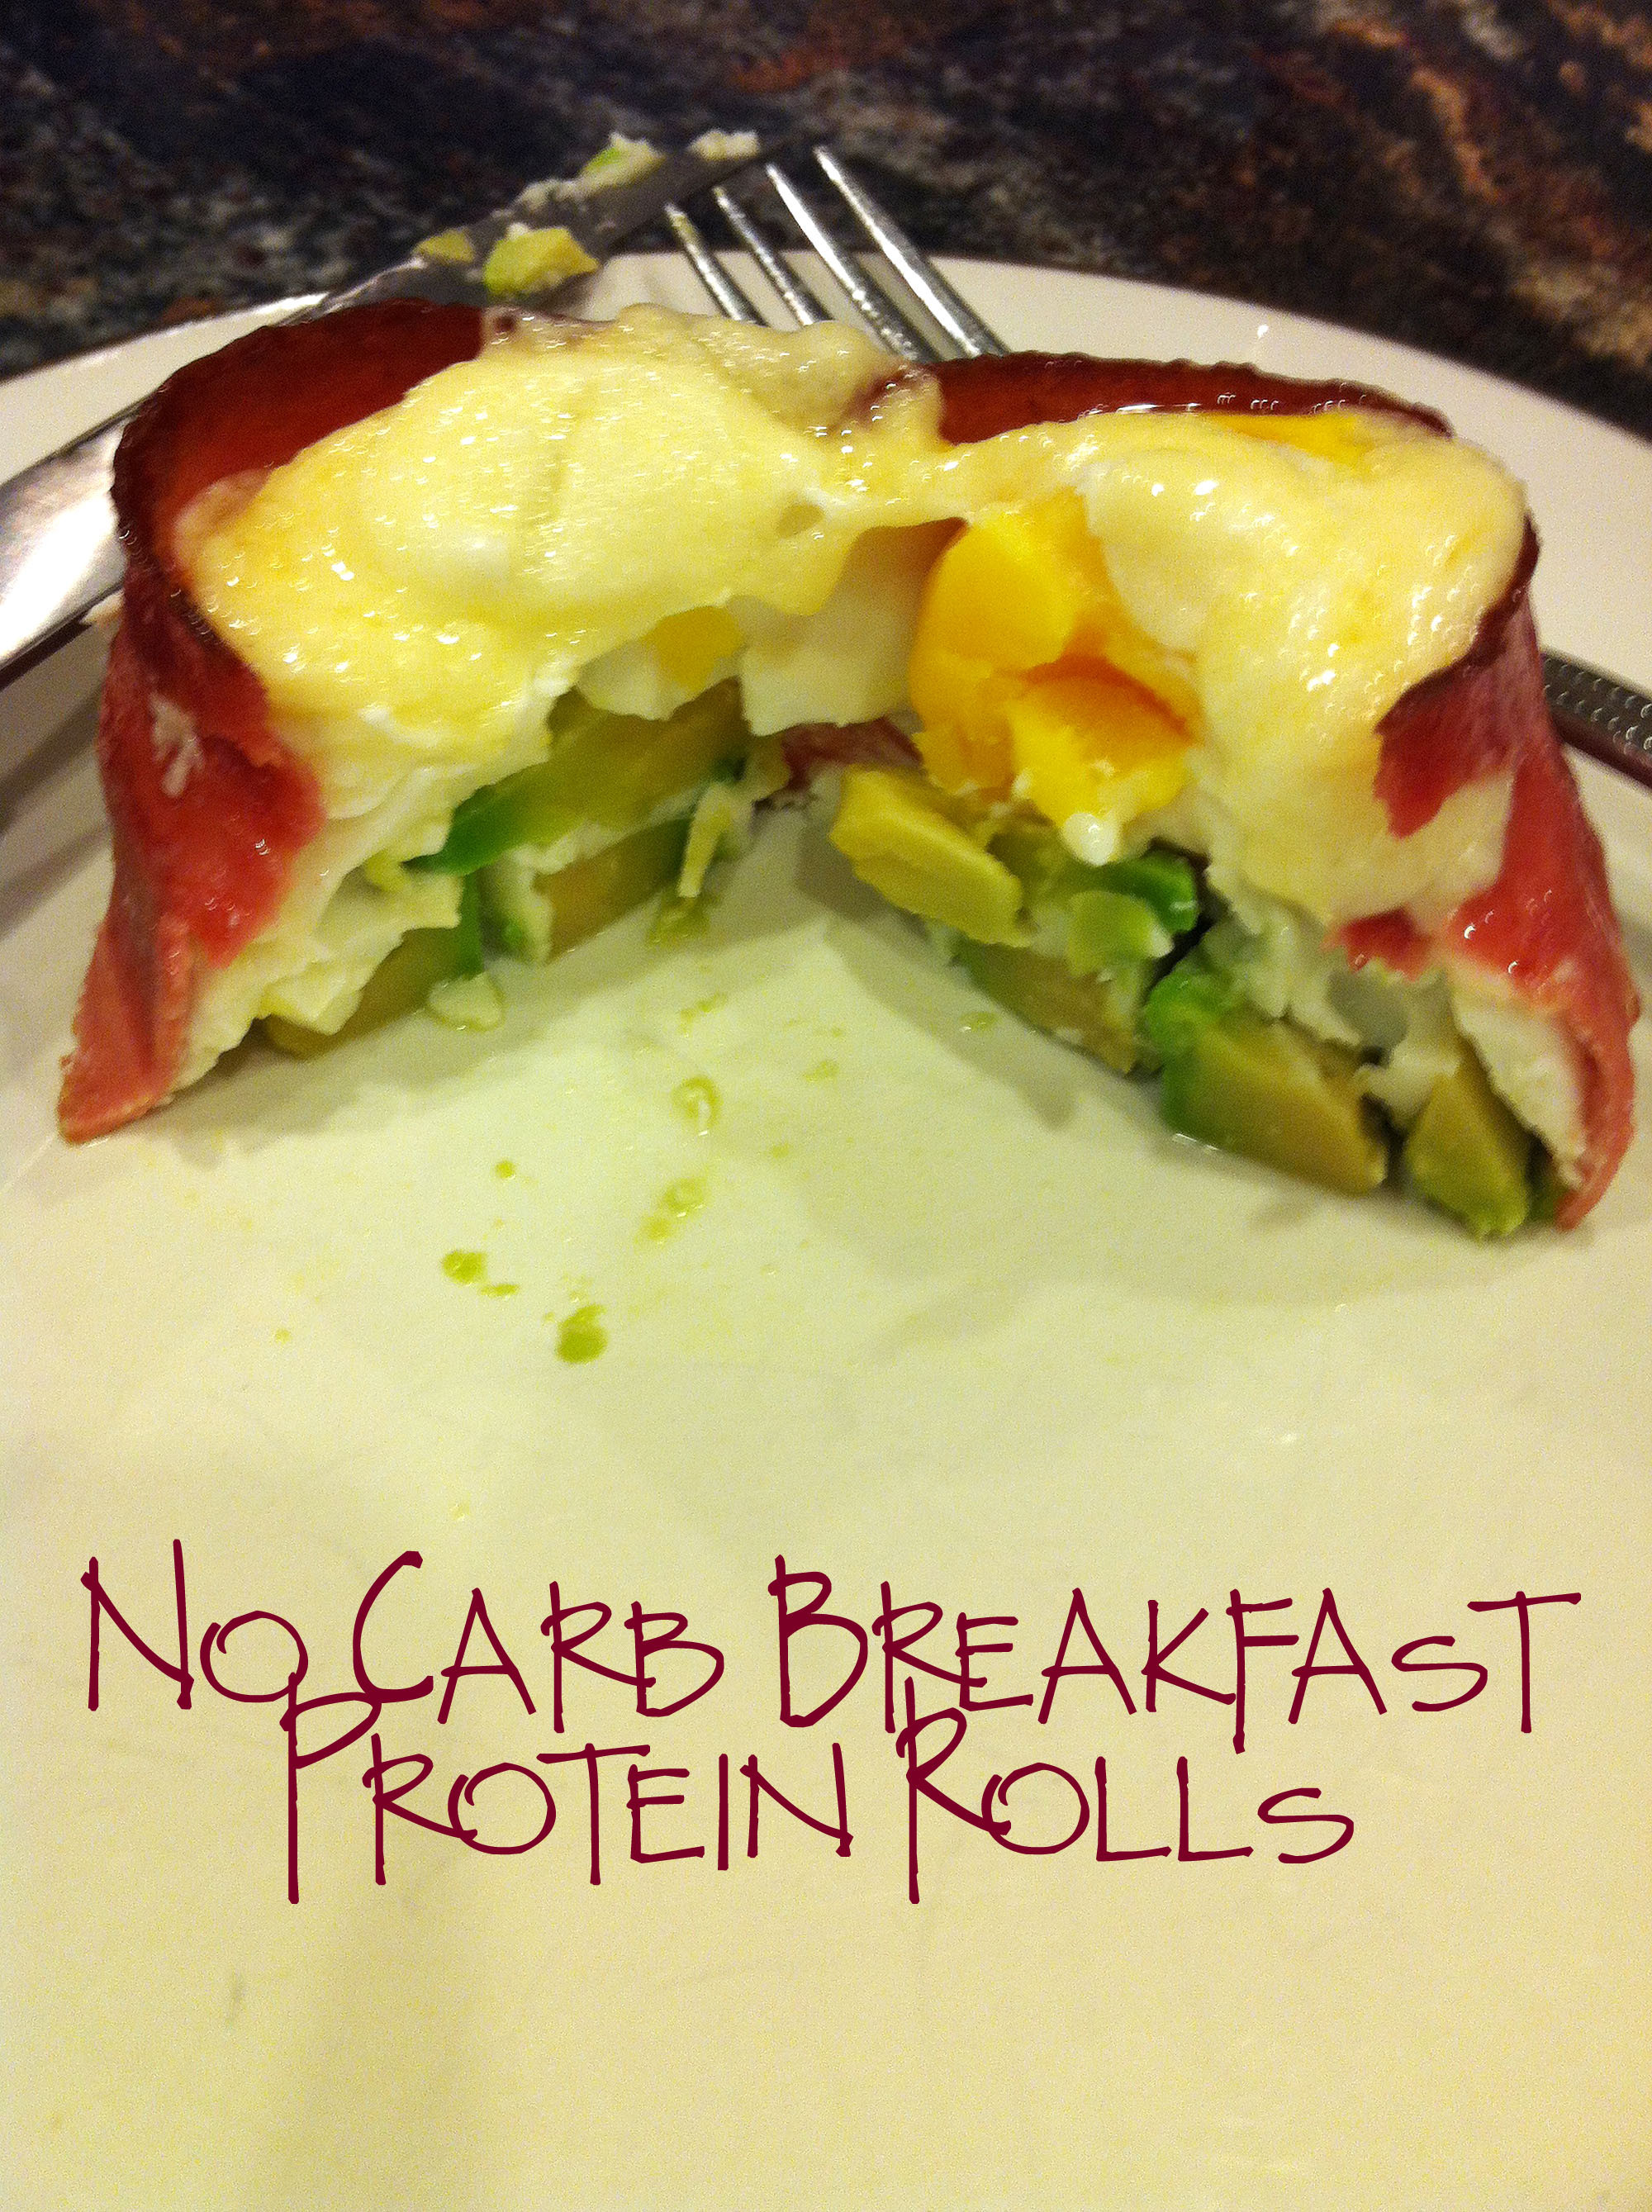 No Carb Breakfast Recipes
 No Carb Breakfast Protein Rolls